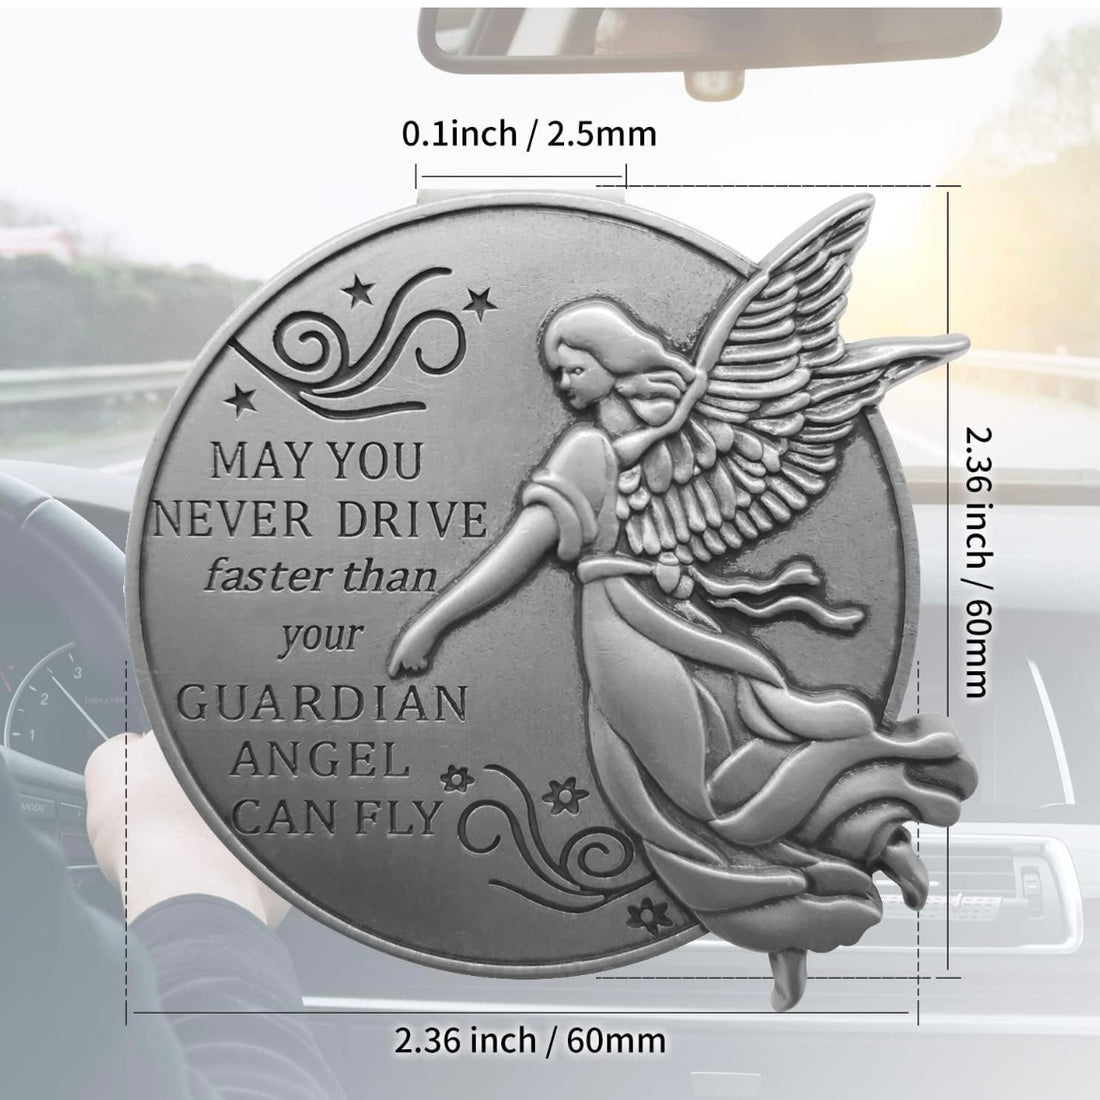 Guardian Angel Visor Clip - A Thoughtful Gift for Safe Driving